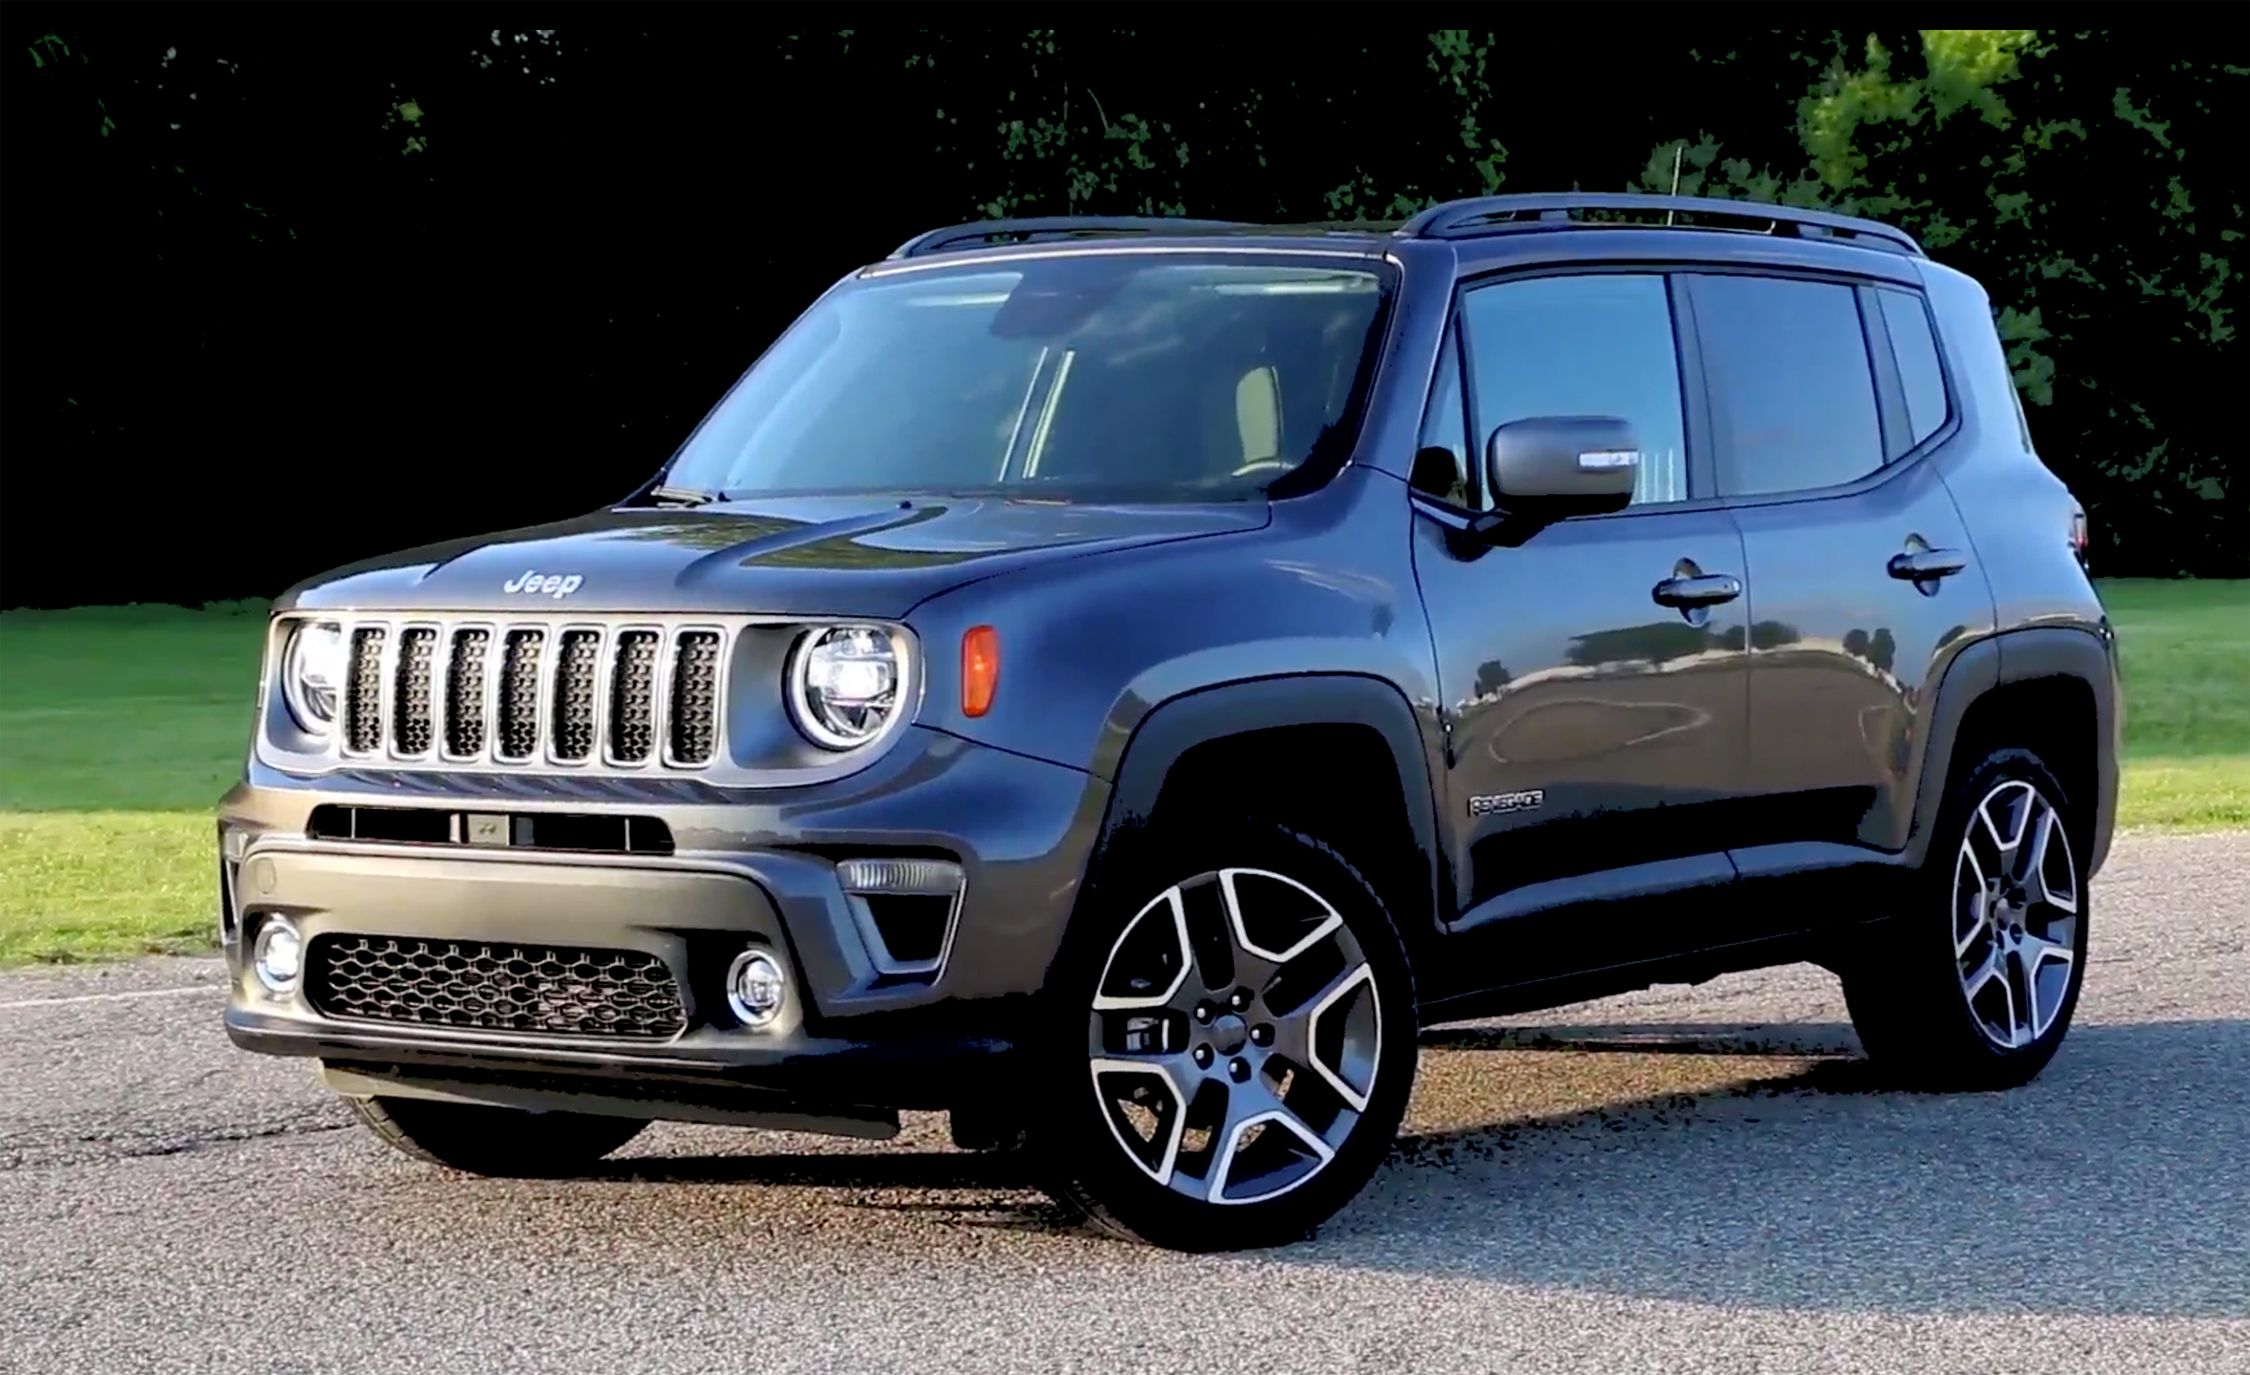 2019 Jeep Renegade Updated New Turbo Engine, Improved Looks